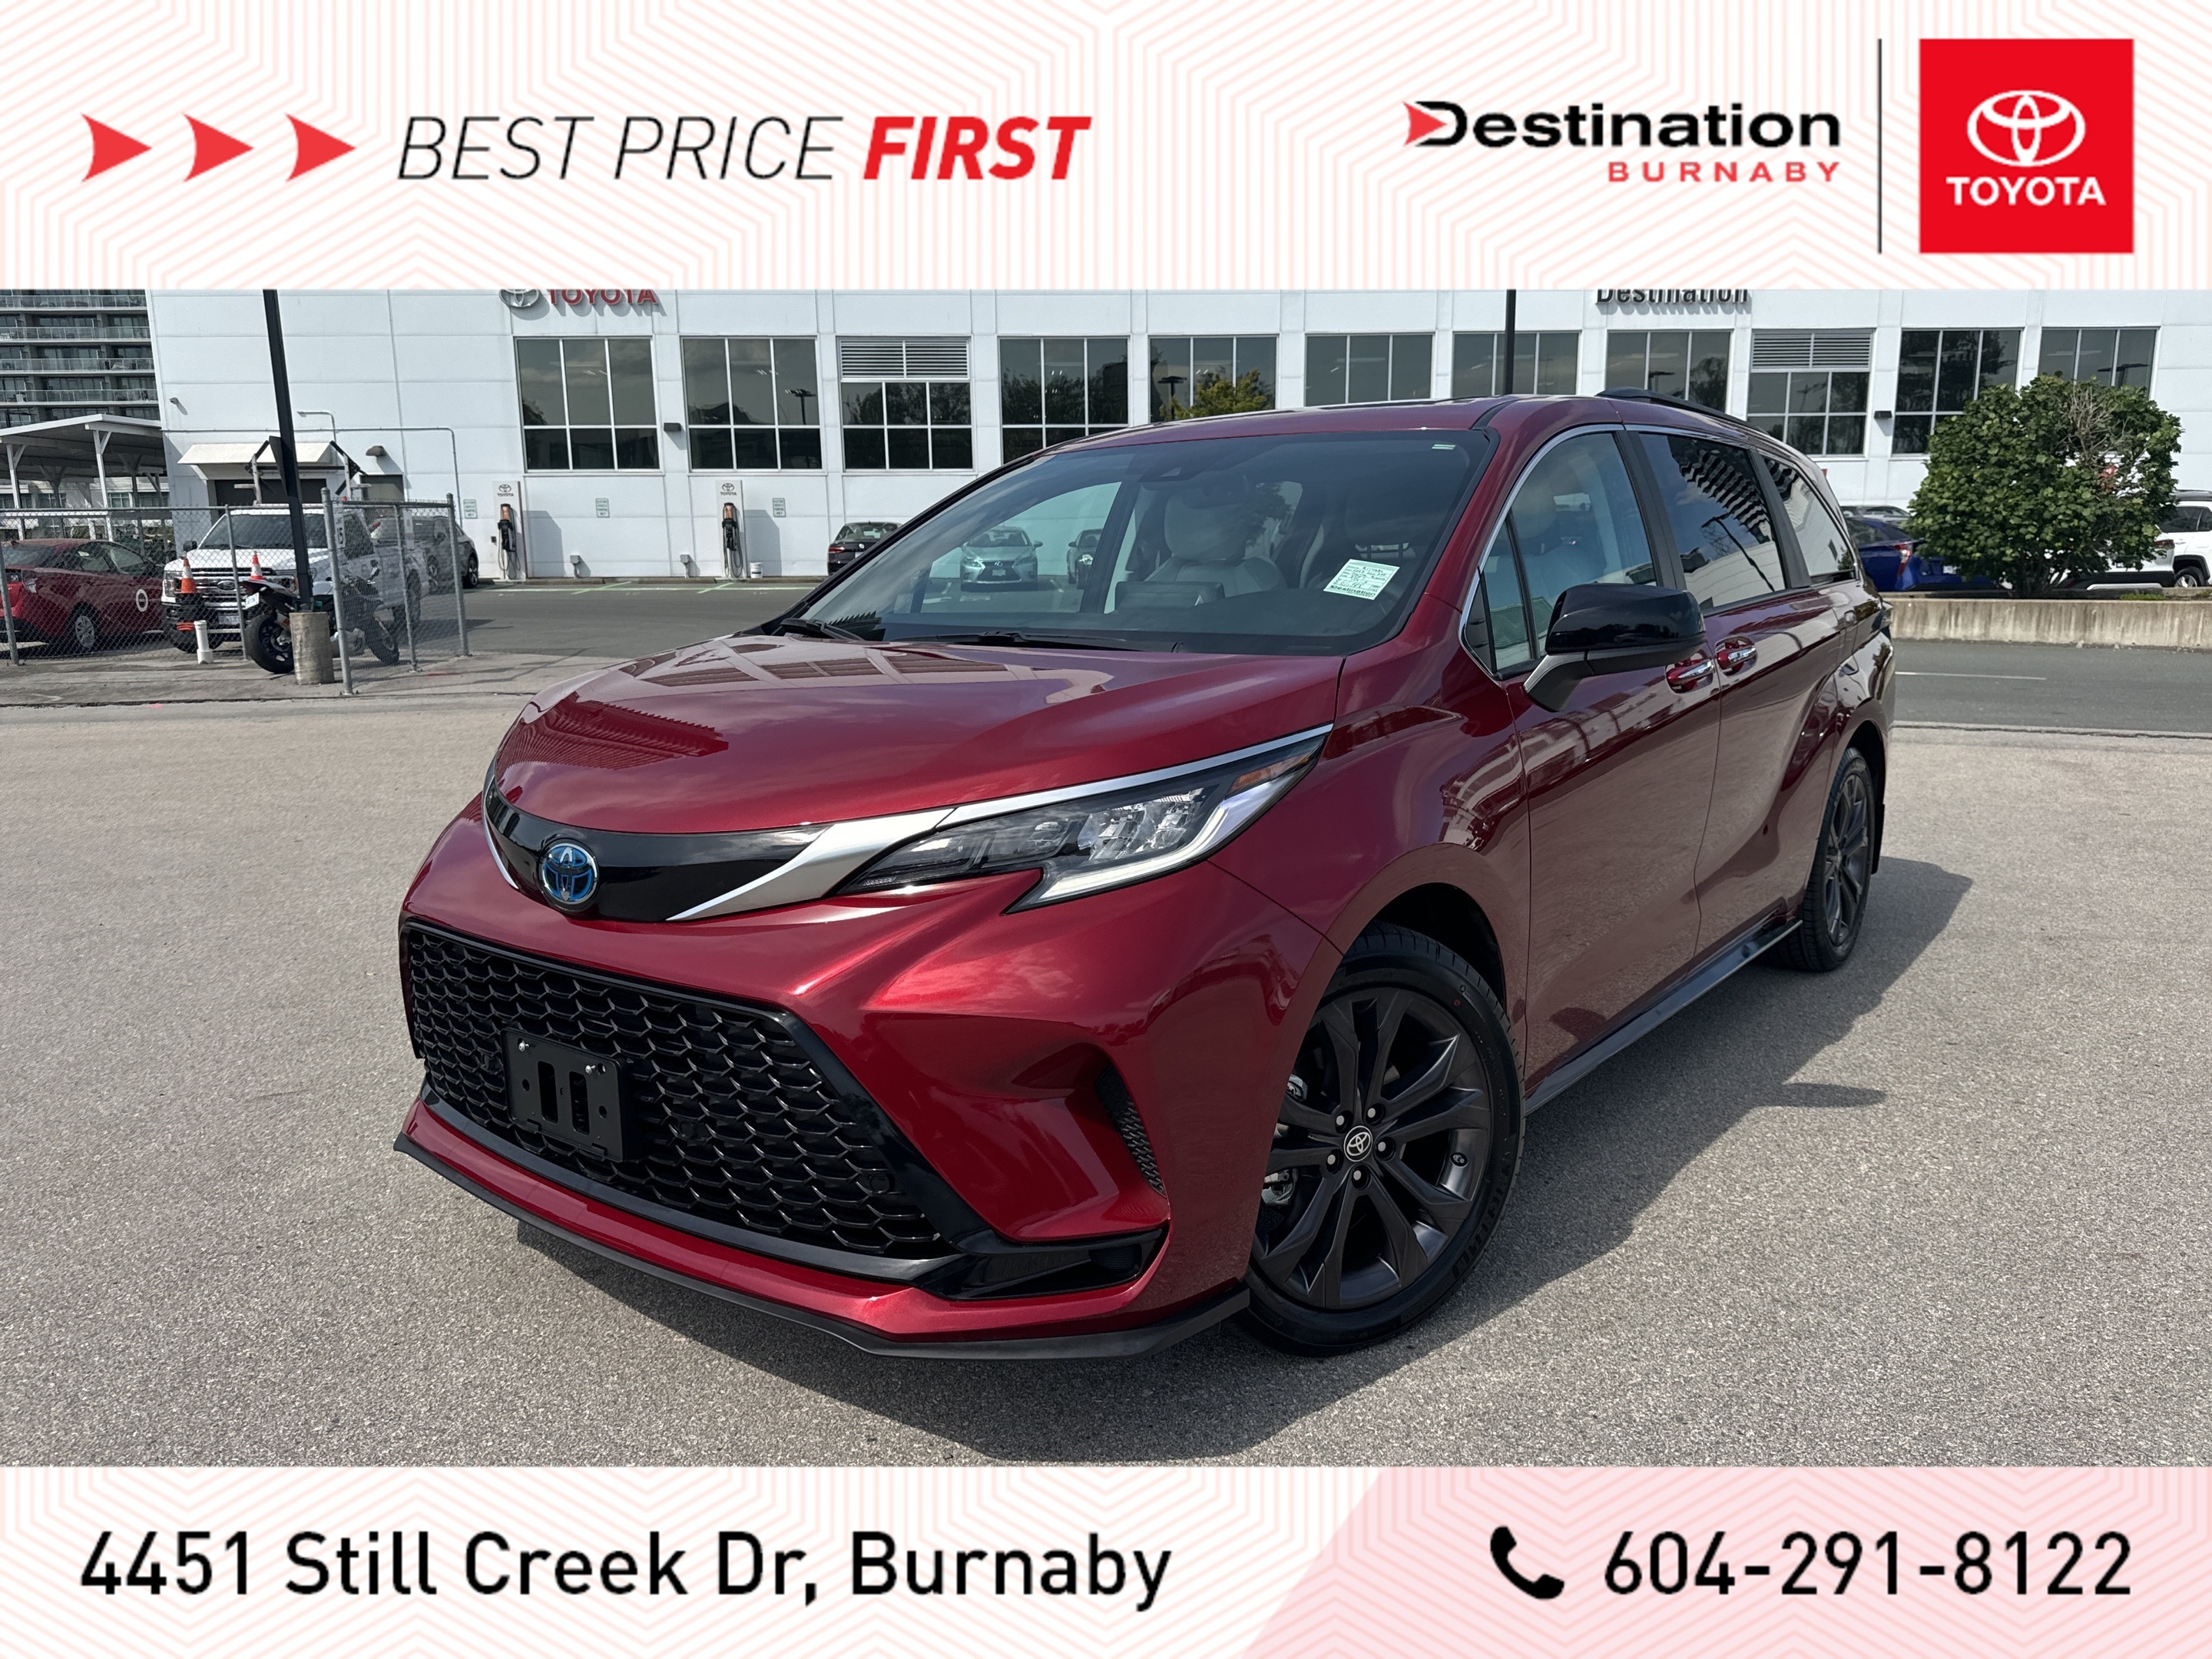 2023 Toyota Sienna XSE - Save 10% on ICBC insurance. Toyota Certified